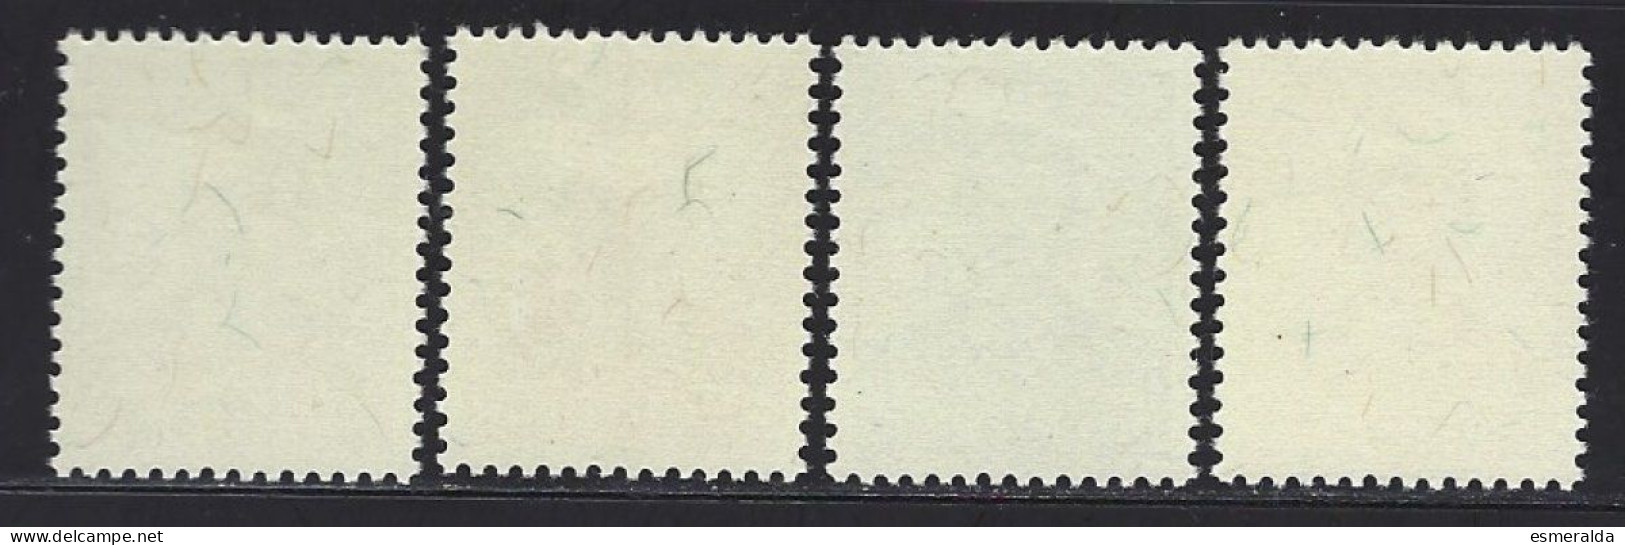 Luxembourg Yv 449/52, Caritas 1951,Laurent Ménager,compositeur.  **/mnh - Unused Stamps